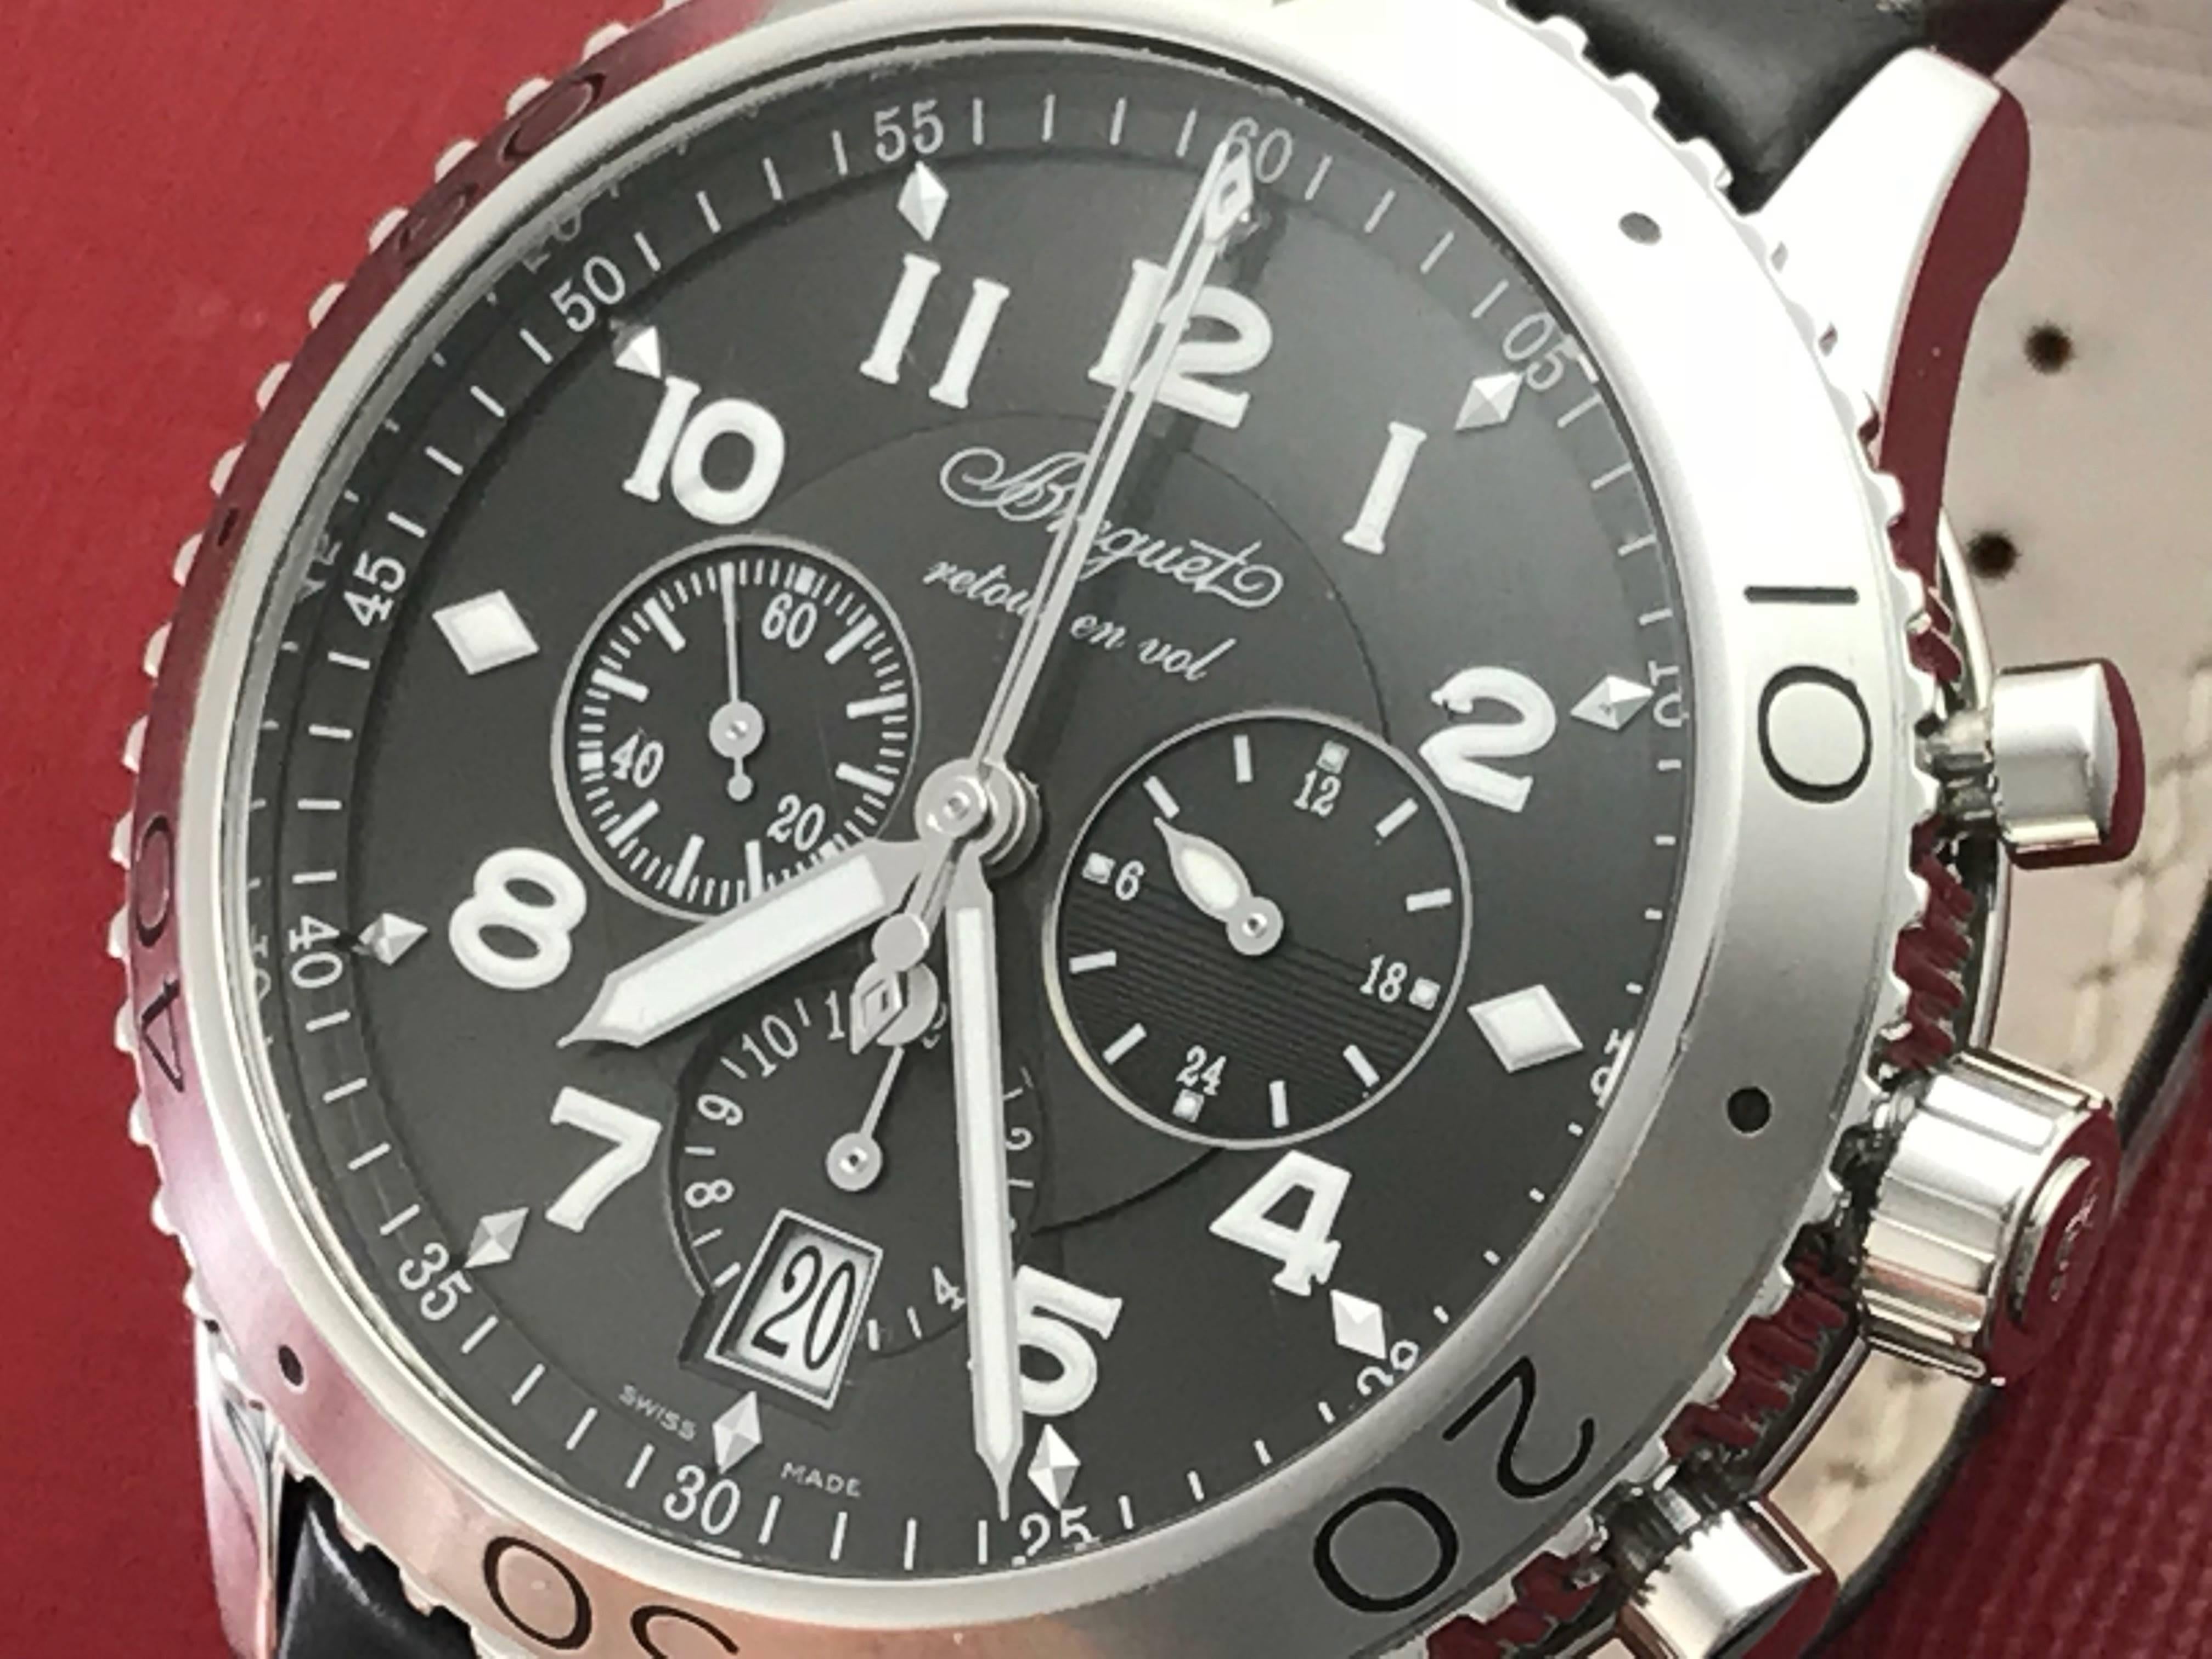 Breguet Type XXI Flyback Chronograph Model 3810ST/92/9ZU certified pre-owned men's automatic wrist watch.  Featuring a charcoal dial with luminous arabic numerals encased in stainless steel, with a screw down crown and measuring 42mm. Dark chocolate